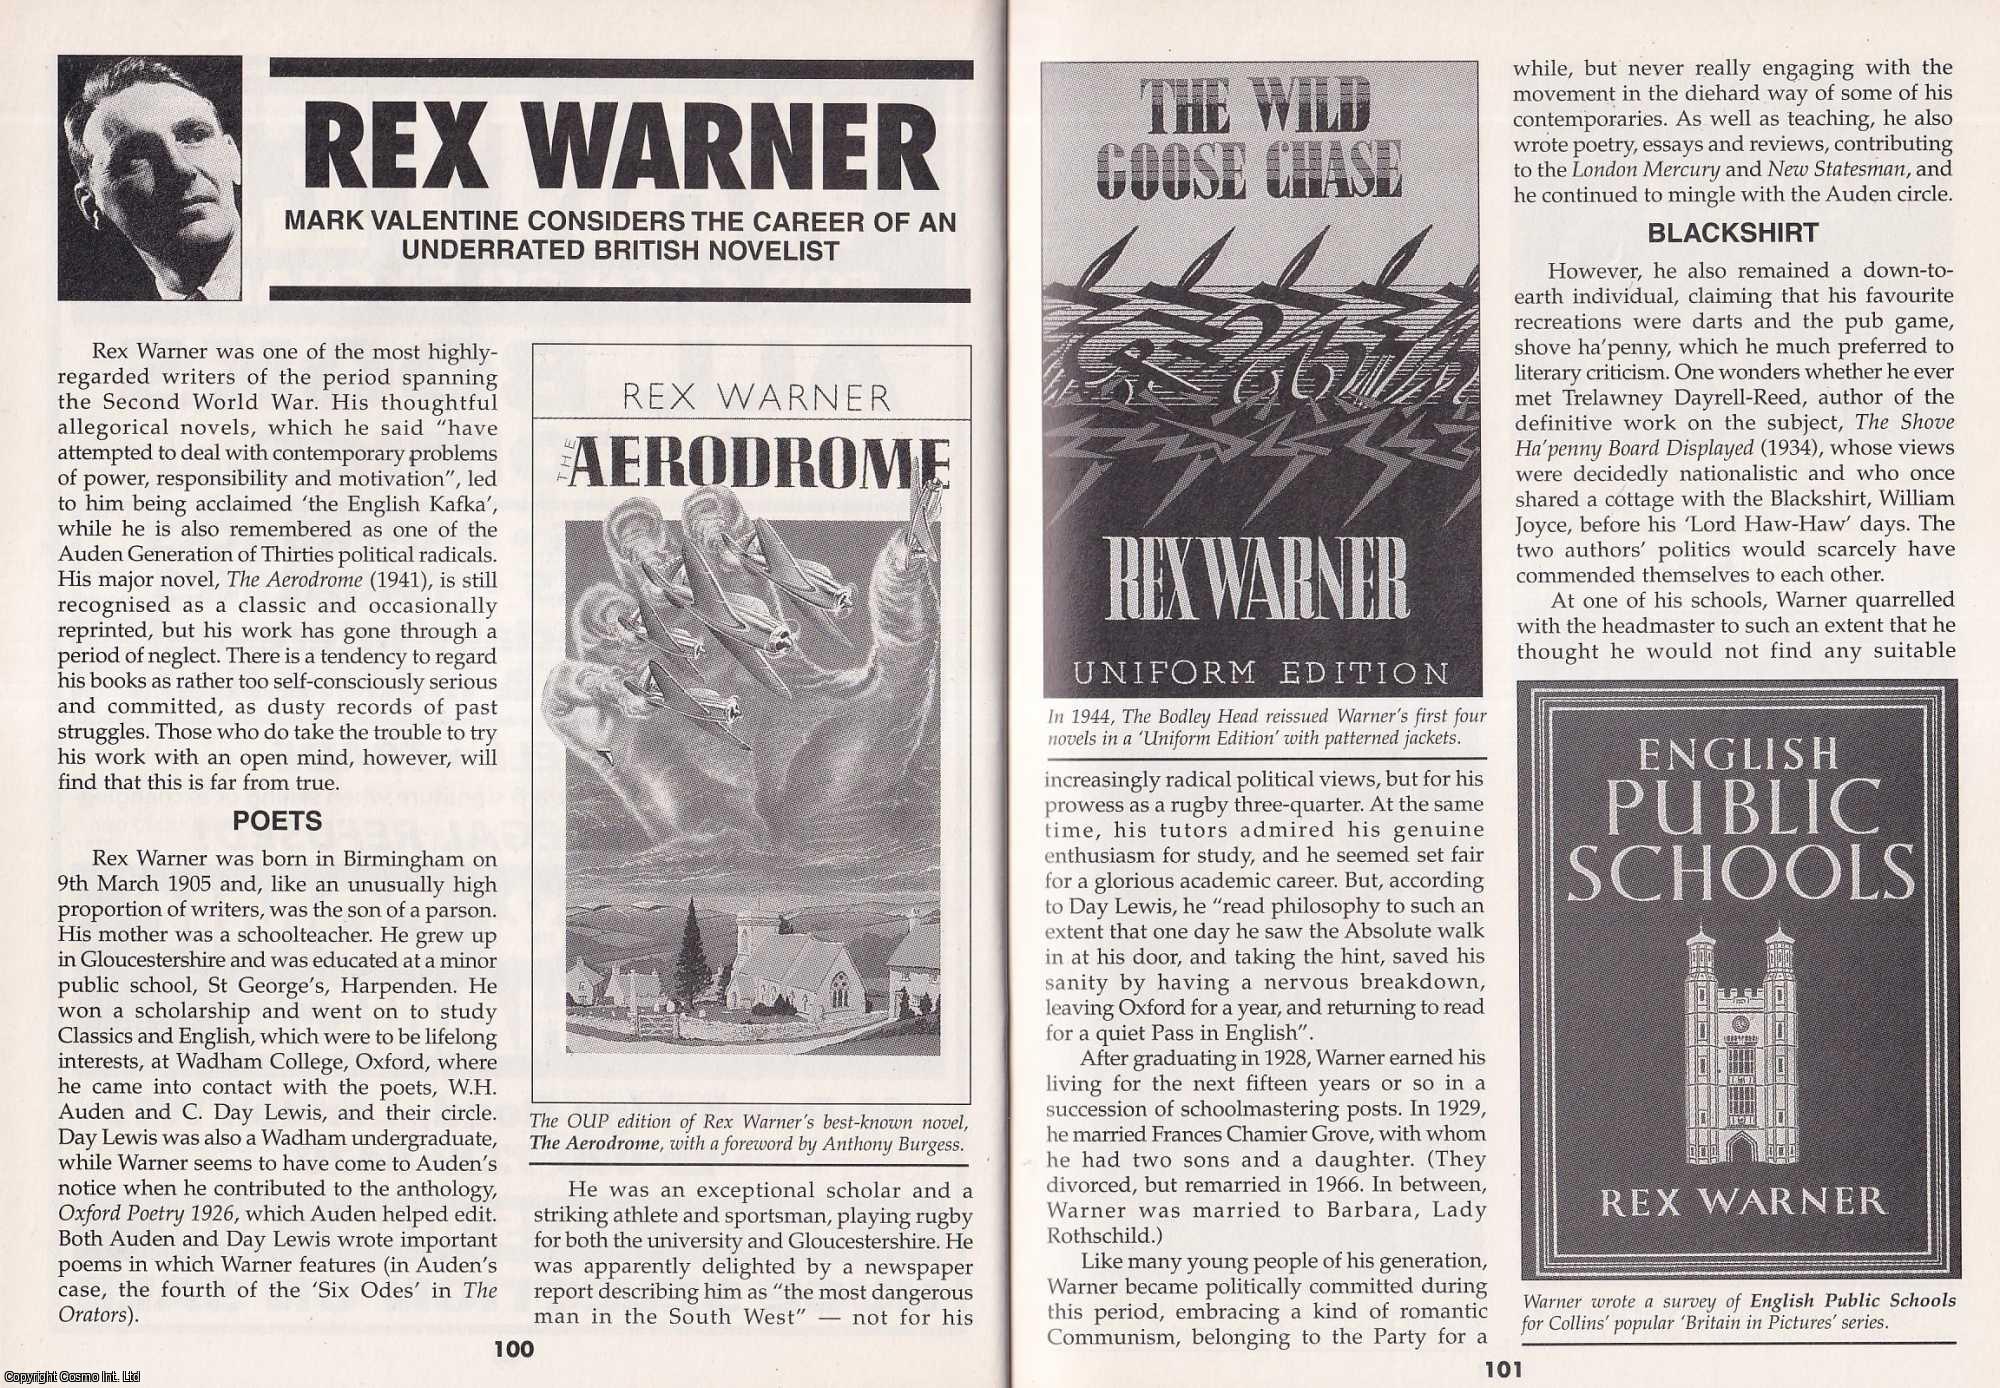 Mark Valentine - Rex Warner. Considering The Career of an Underrated British Novelist. This is an original article separated from an issue of The Book & Magazine Collector publication.